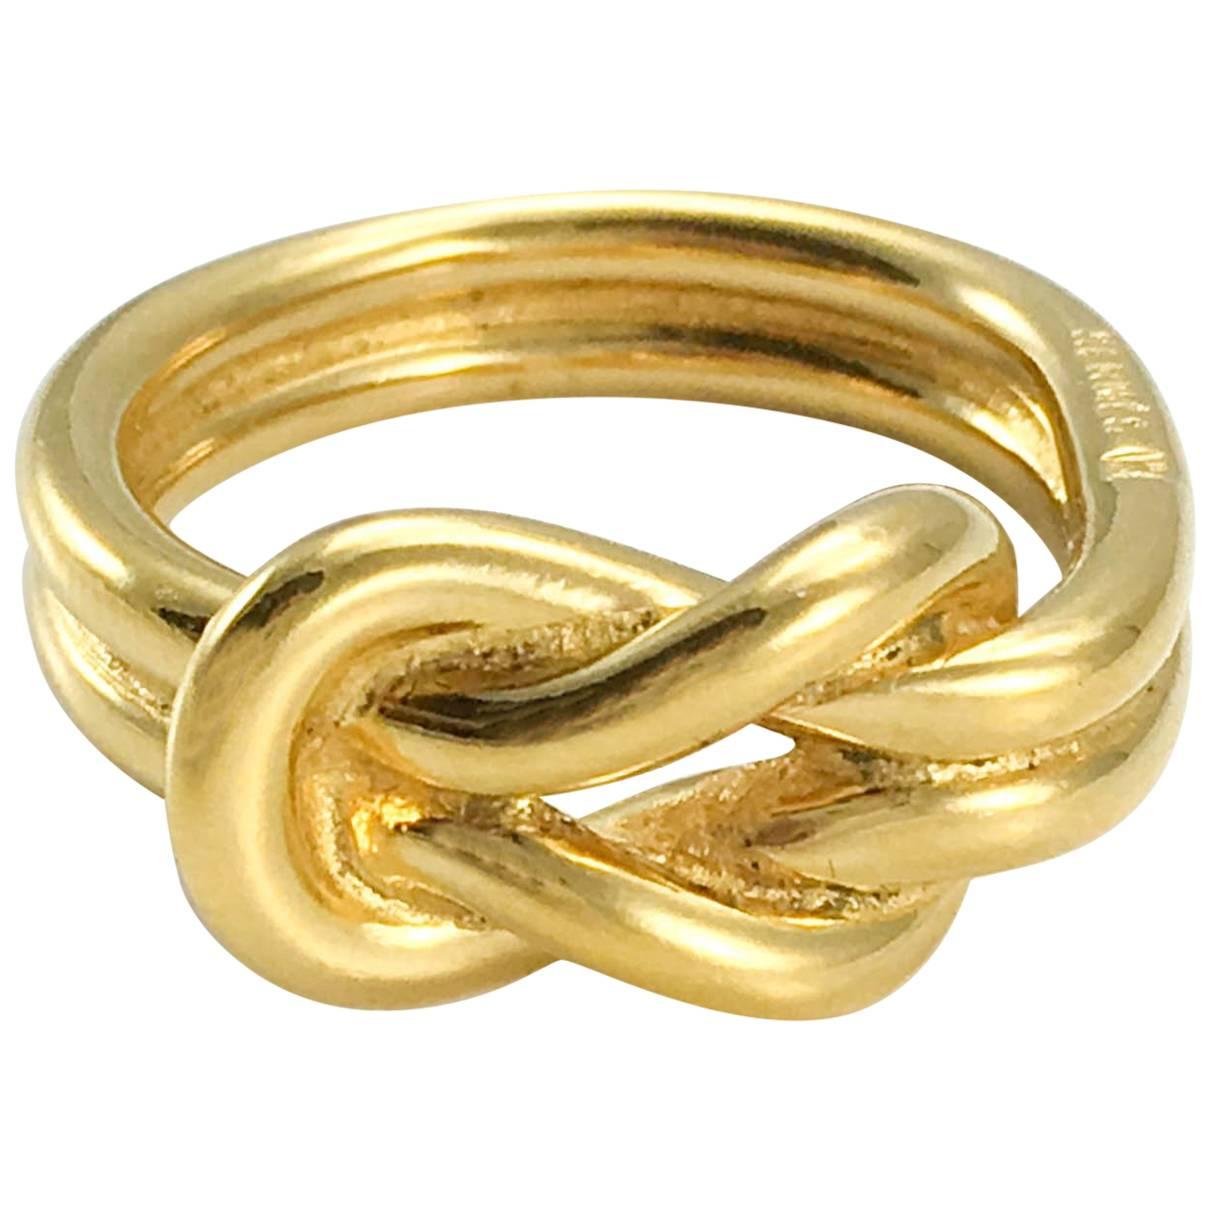 Hermes Gold-Tone 'Knotted' Scarf Ring